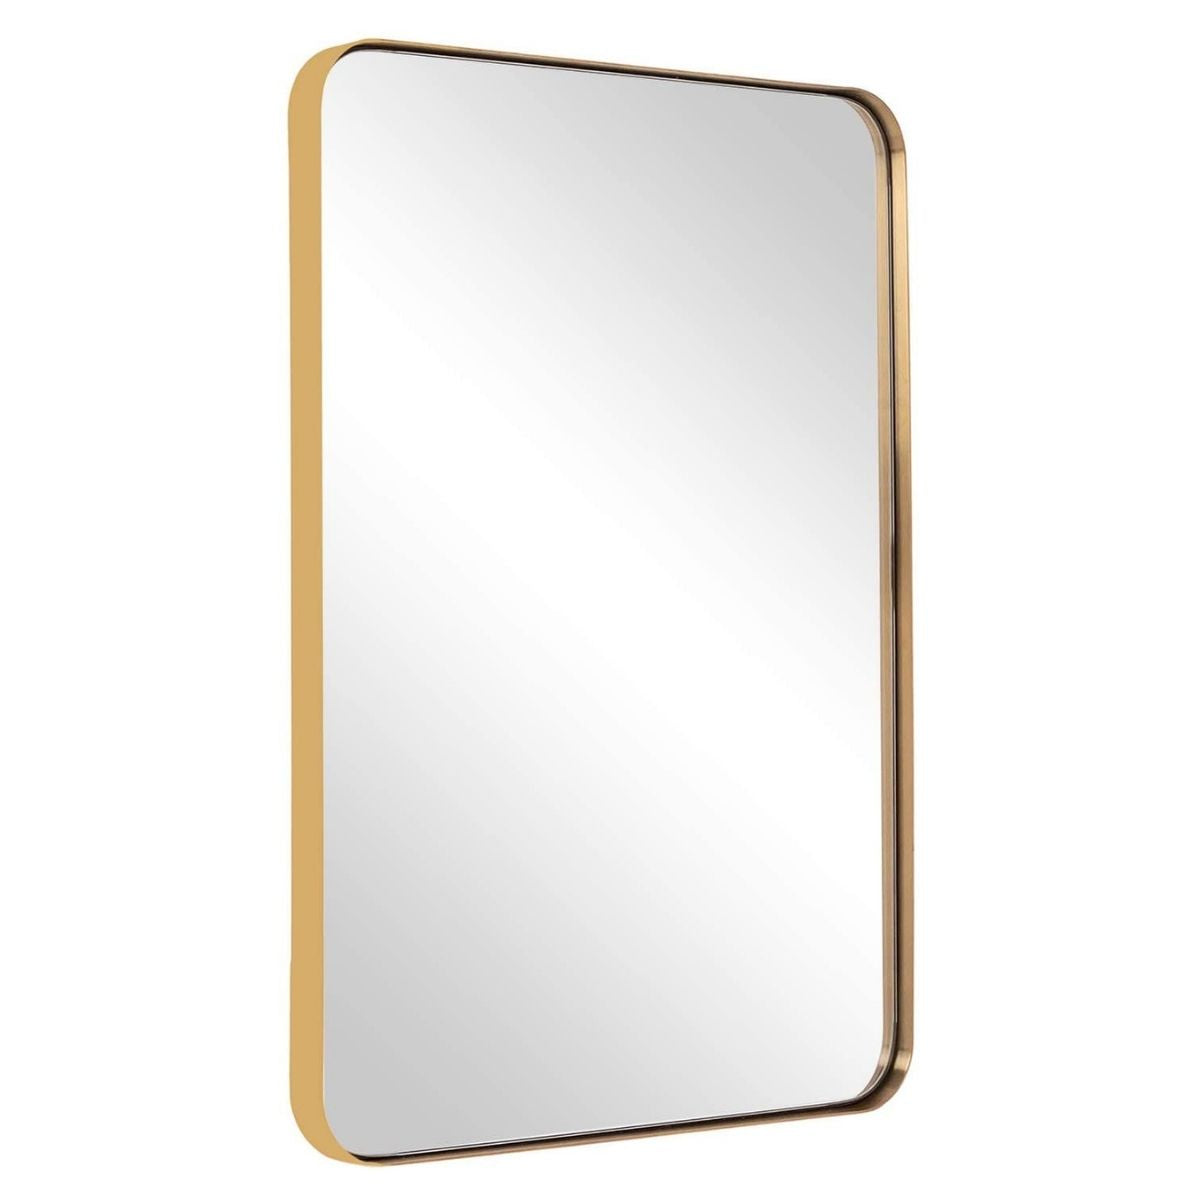 ANDY STAR Brass Oval Mirror, 24x40 Inch Bathroom Mirror Gold , Brass Vanity  Mirror, Pill Shaped Mirrors Gold Metal Frame Stainless Steel 1 Deep Hang  Vertically & Horizontally Ideal for Narrow Space 